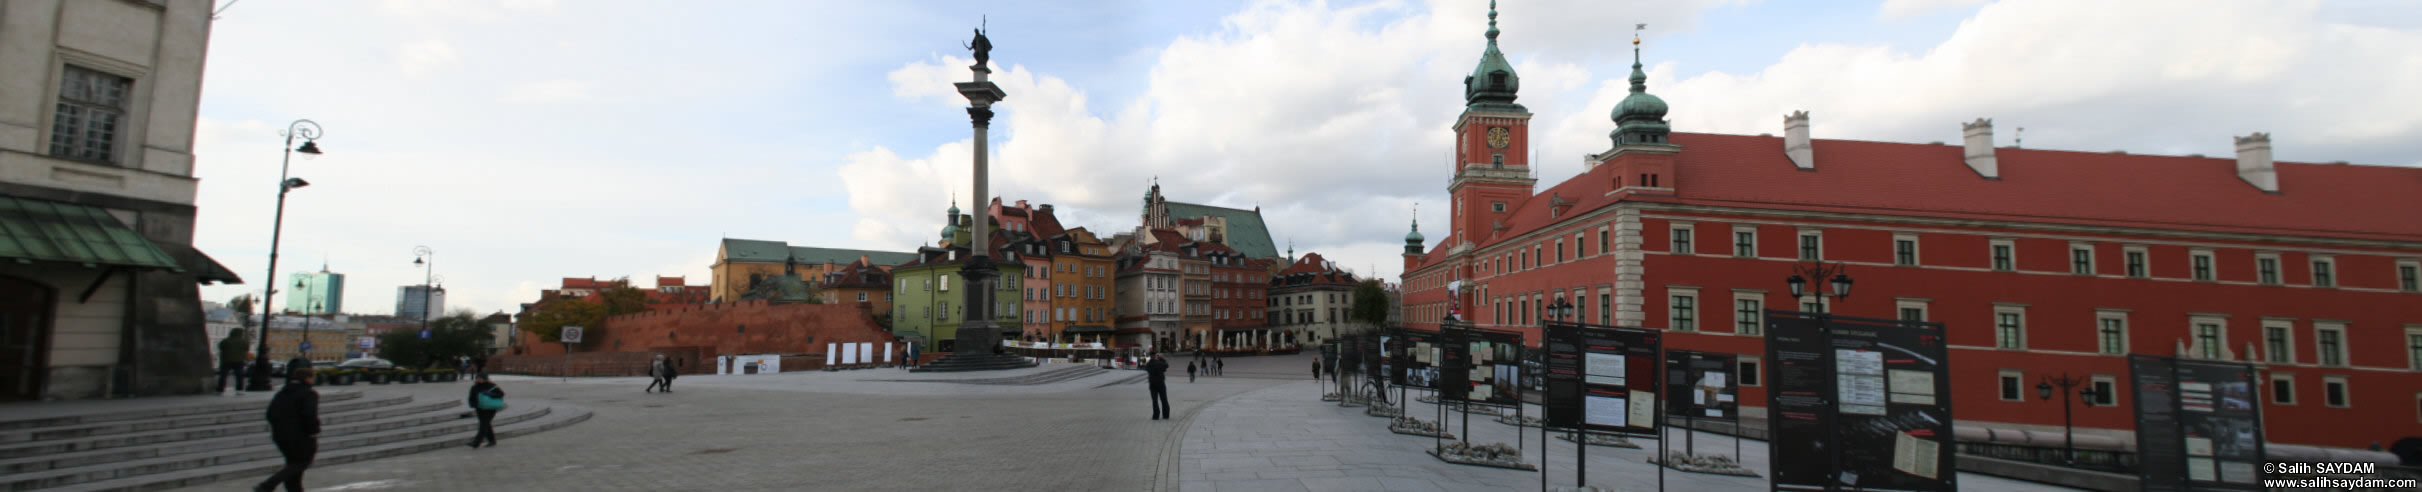 Old Town Panorama 09 (Castle Square, Warsaw, Poland)